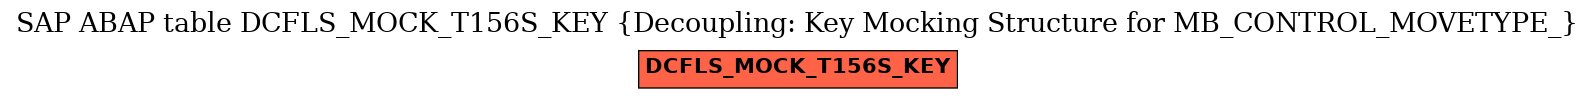 E-R Diagram for table DCFLS_MOCK_T156S_KEY (Decoupling: Key Mocking Structure for MB_CONTROL_MOVETYPE_)